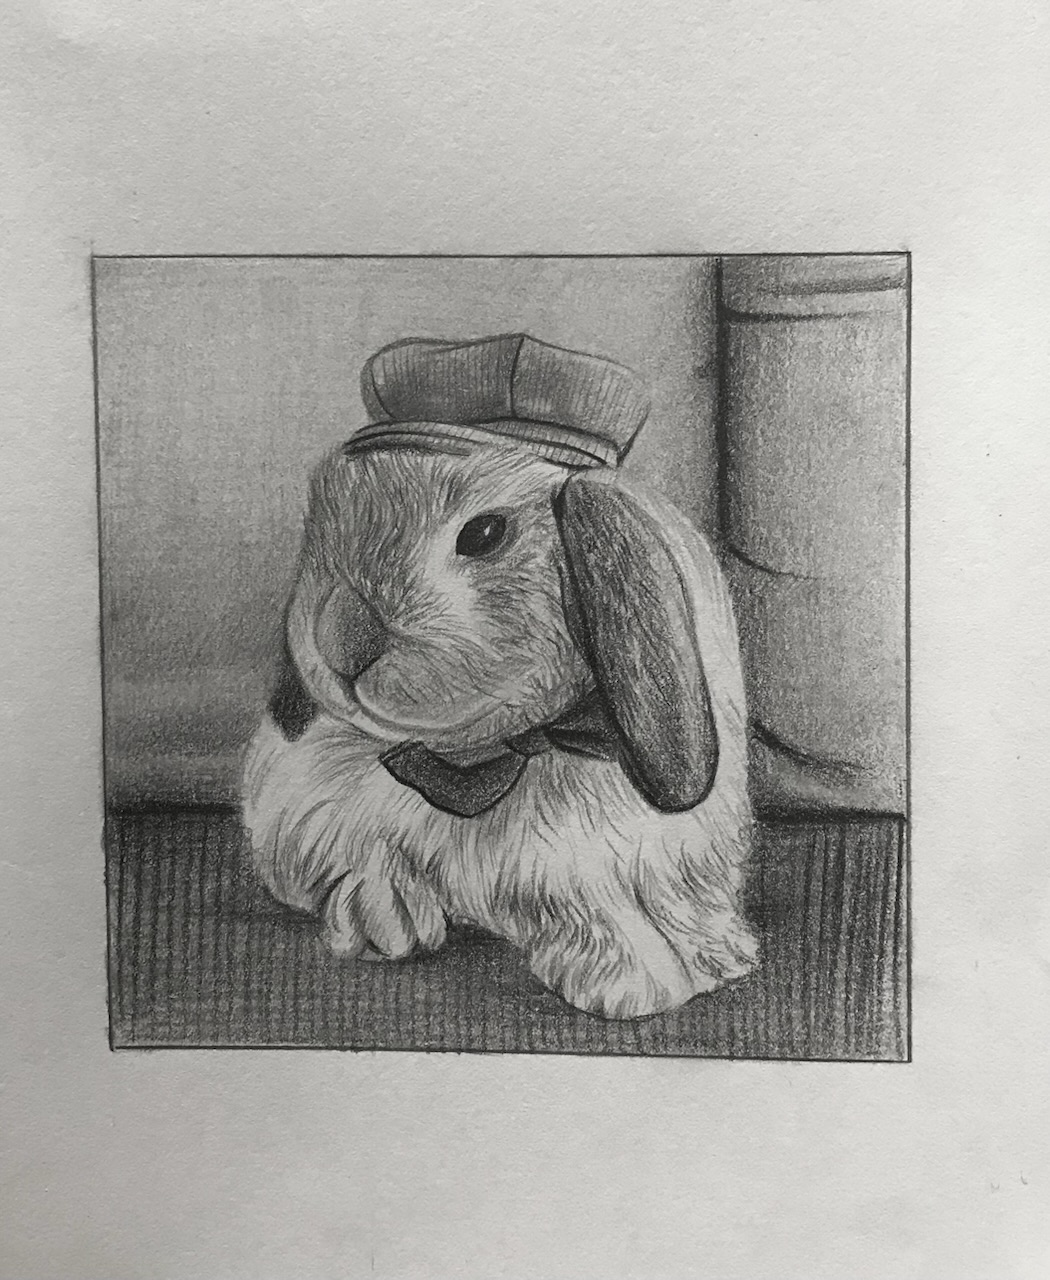 Bunny RABBIT Pencil Drawing Print - A4 only signed by artist Gary Tymon -  art | eBay